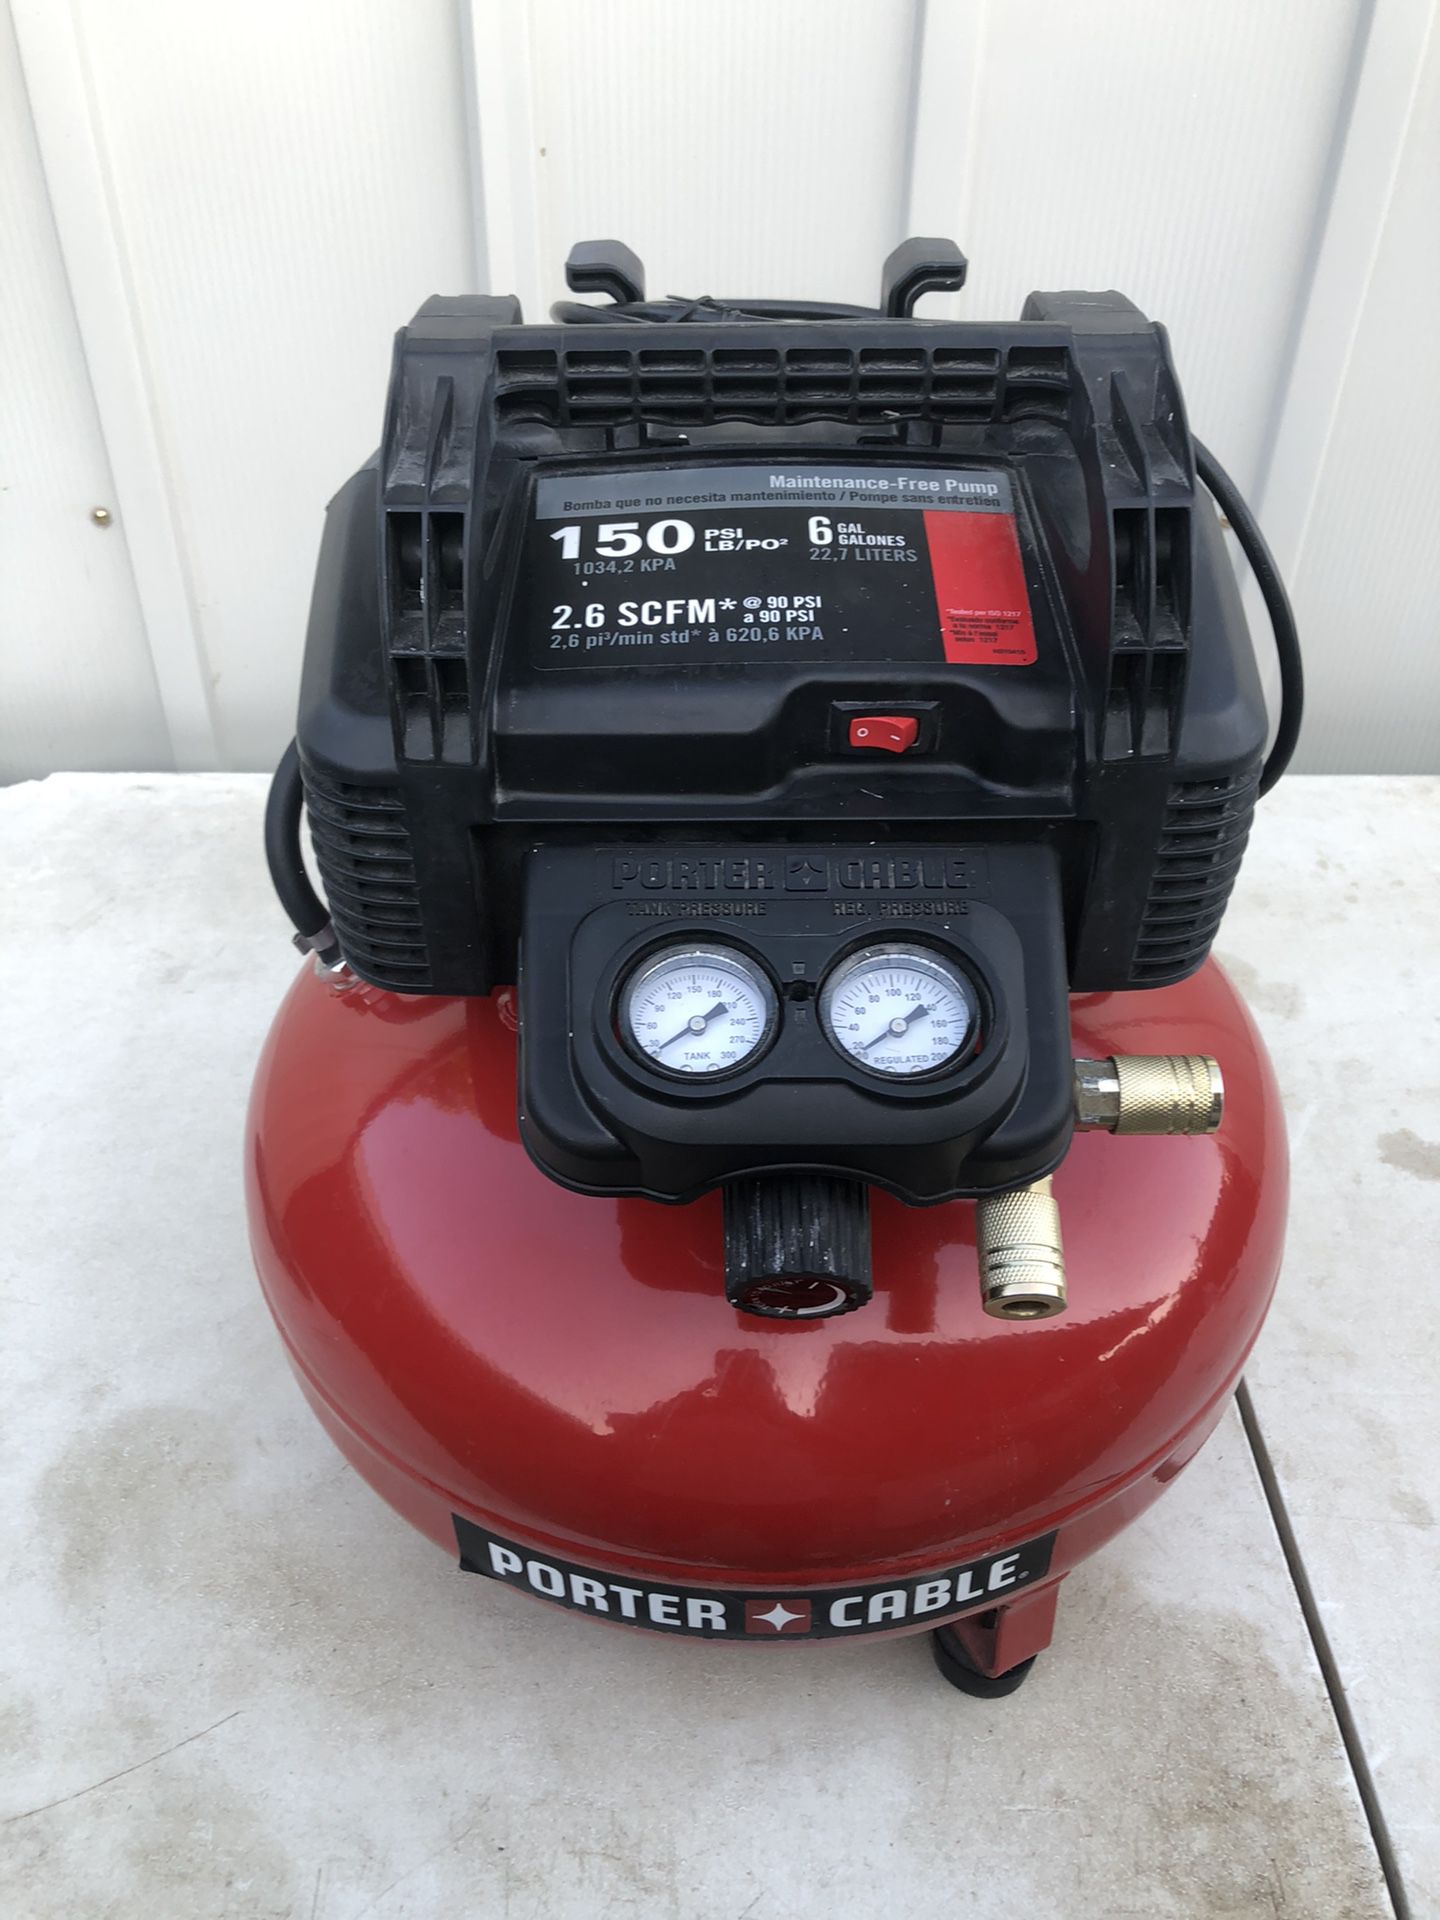 Porter-Cable 6 Gal. 150 PSI Portable Electric Pancake Air Compressor